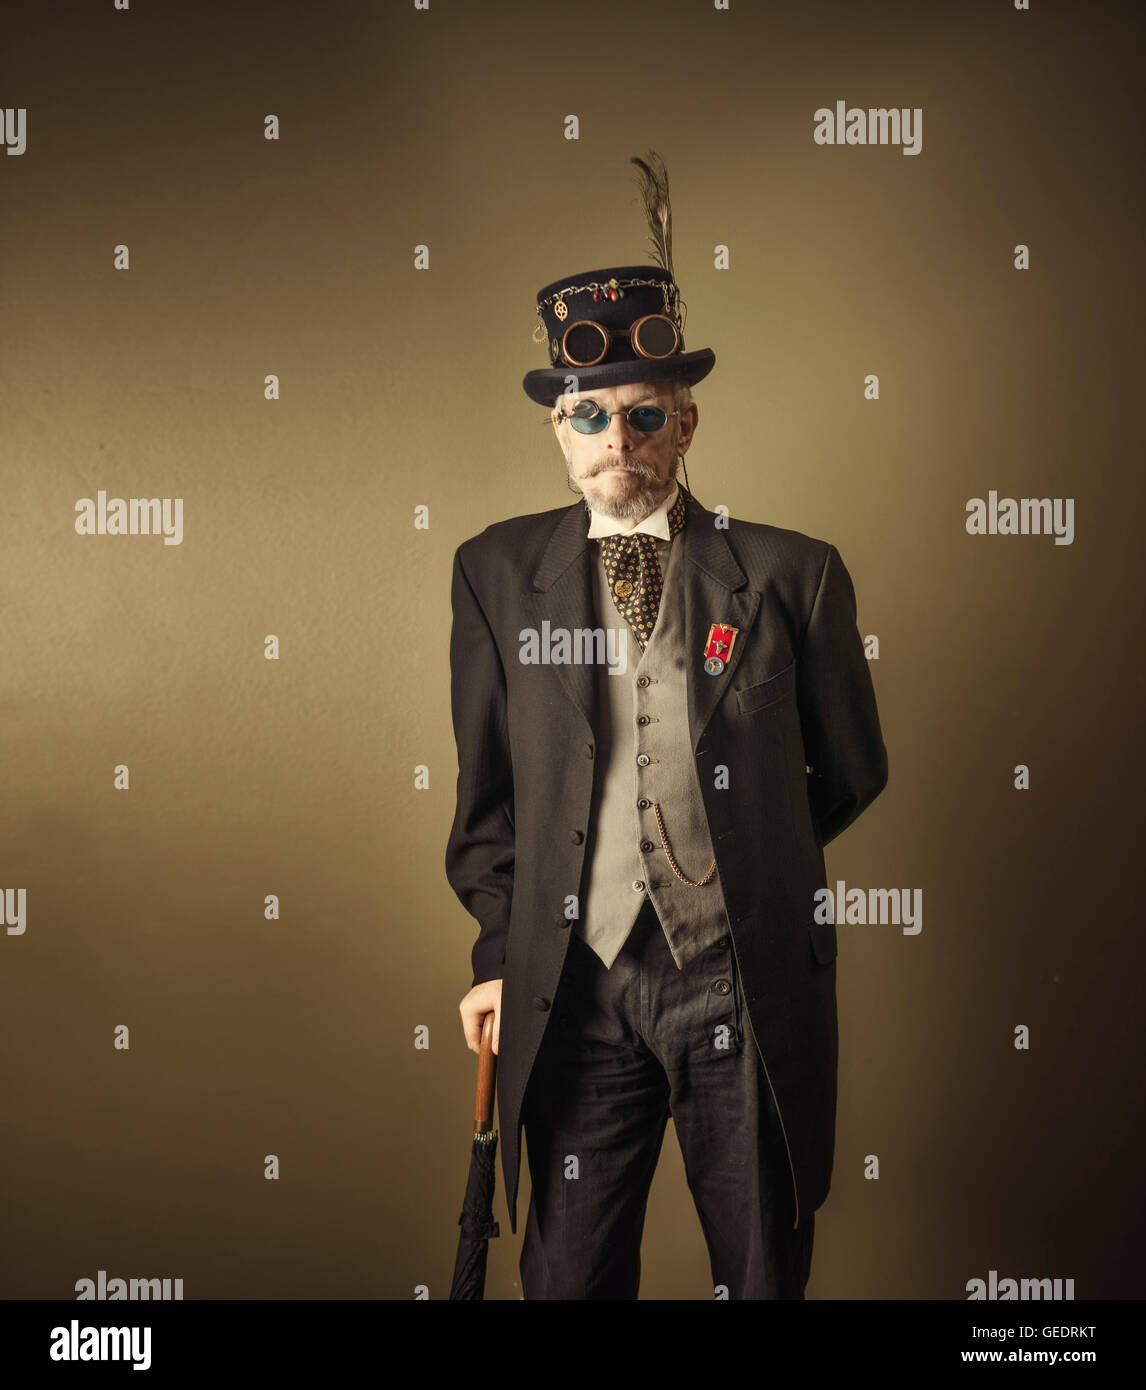 Cosplayers dressed as a steampunk poses for photographs at a Comic Con convention. Stock Photo